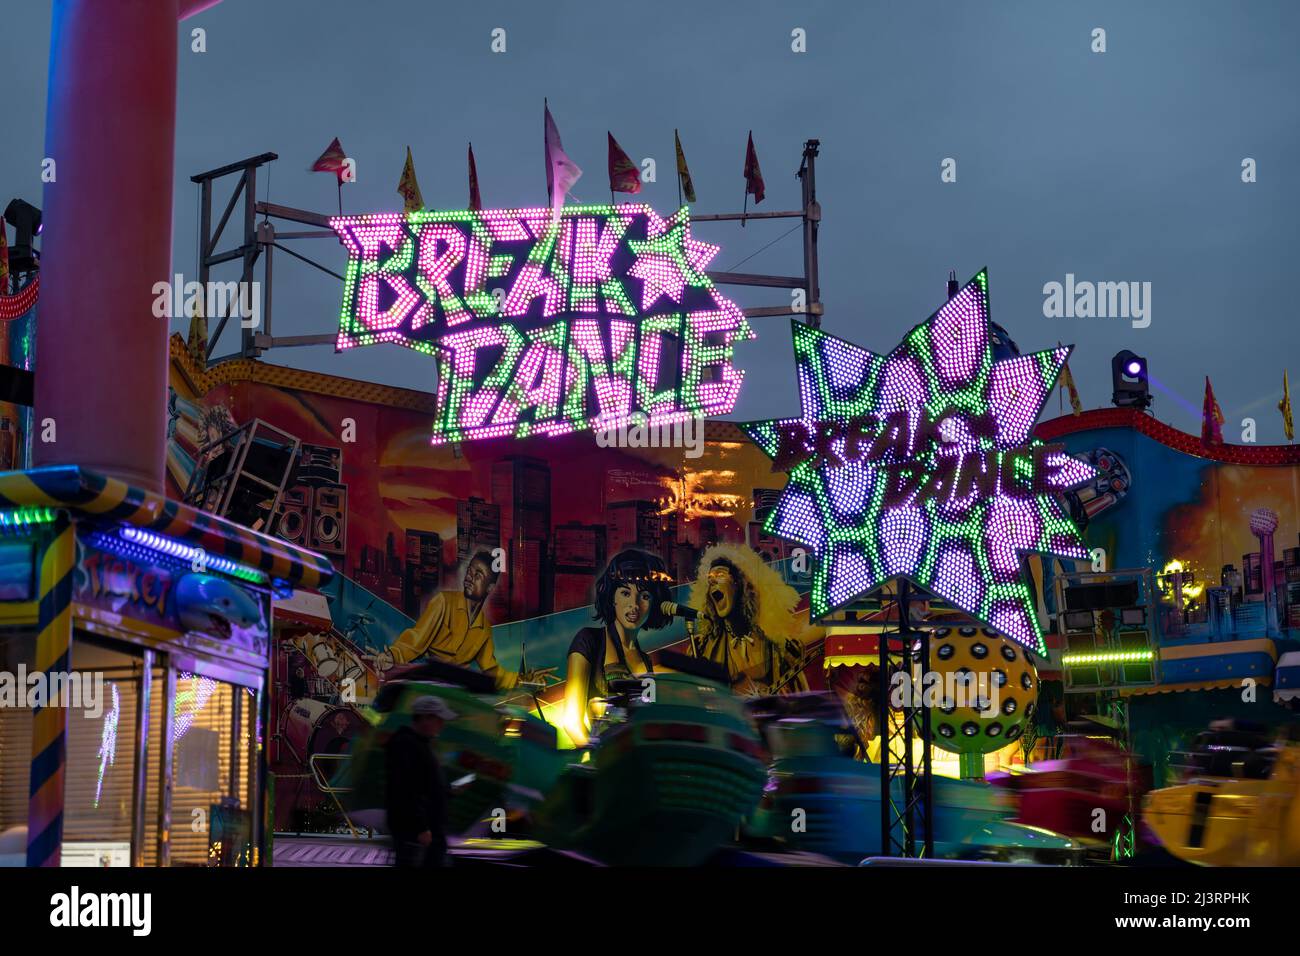 Breakdance funfair ride with a big illuminated logo in the evening. The fairground ride is spinning very fast. Leisure activities in Germany Stock Photo